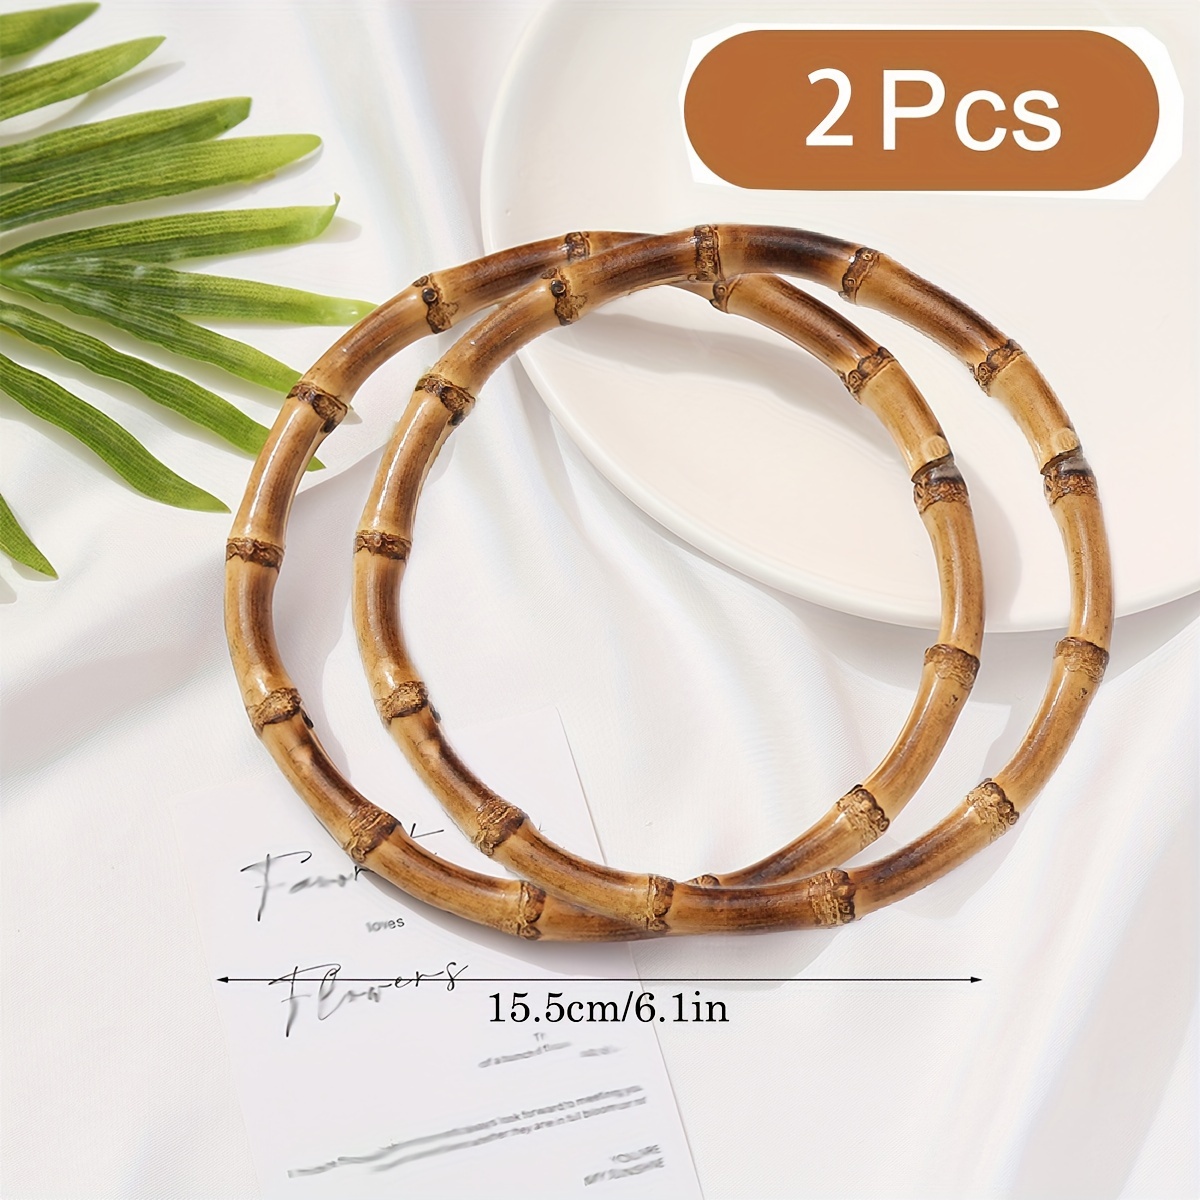 

2pcs 5inch Real Bamboo Handle For Handbag, Luggage Accessories, Handmade Premium Wood Bag With Bamboo Ring, Bamboo Handle Ring Bamboo Crafts, Handmade Bag Accessories Diy Accessories